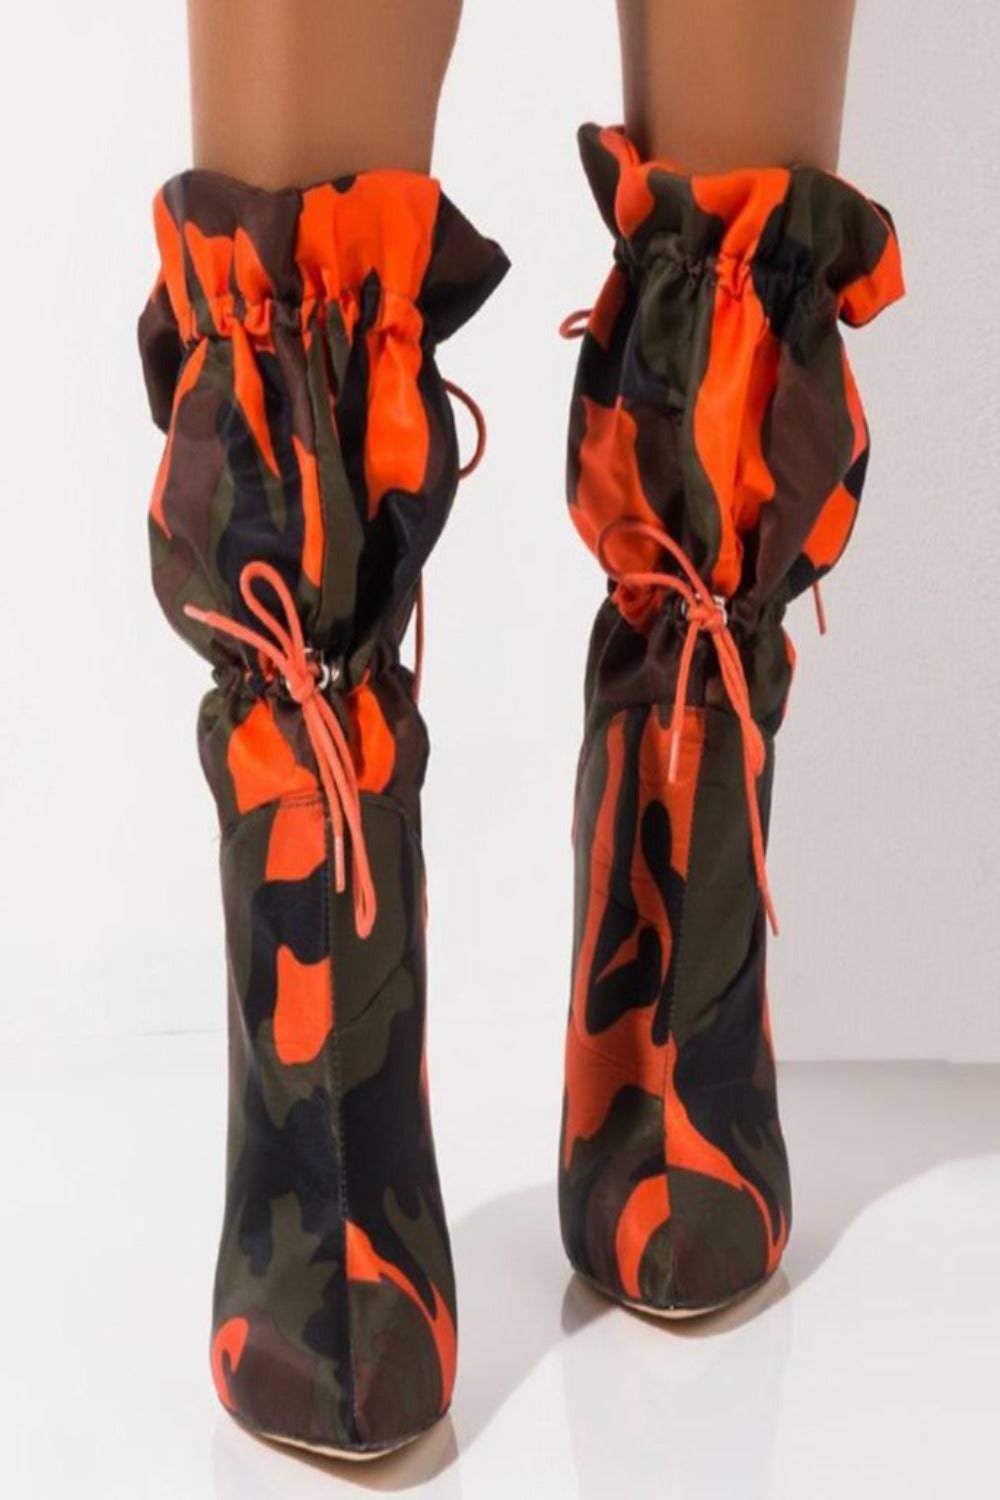 Handmade Camo Lace Up Orange Stiletto High Heel Ankle Boots - TGC Boutique - High Heel Boots